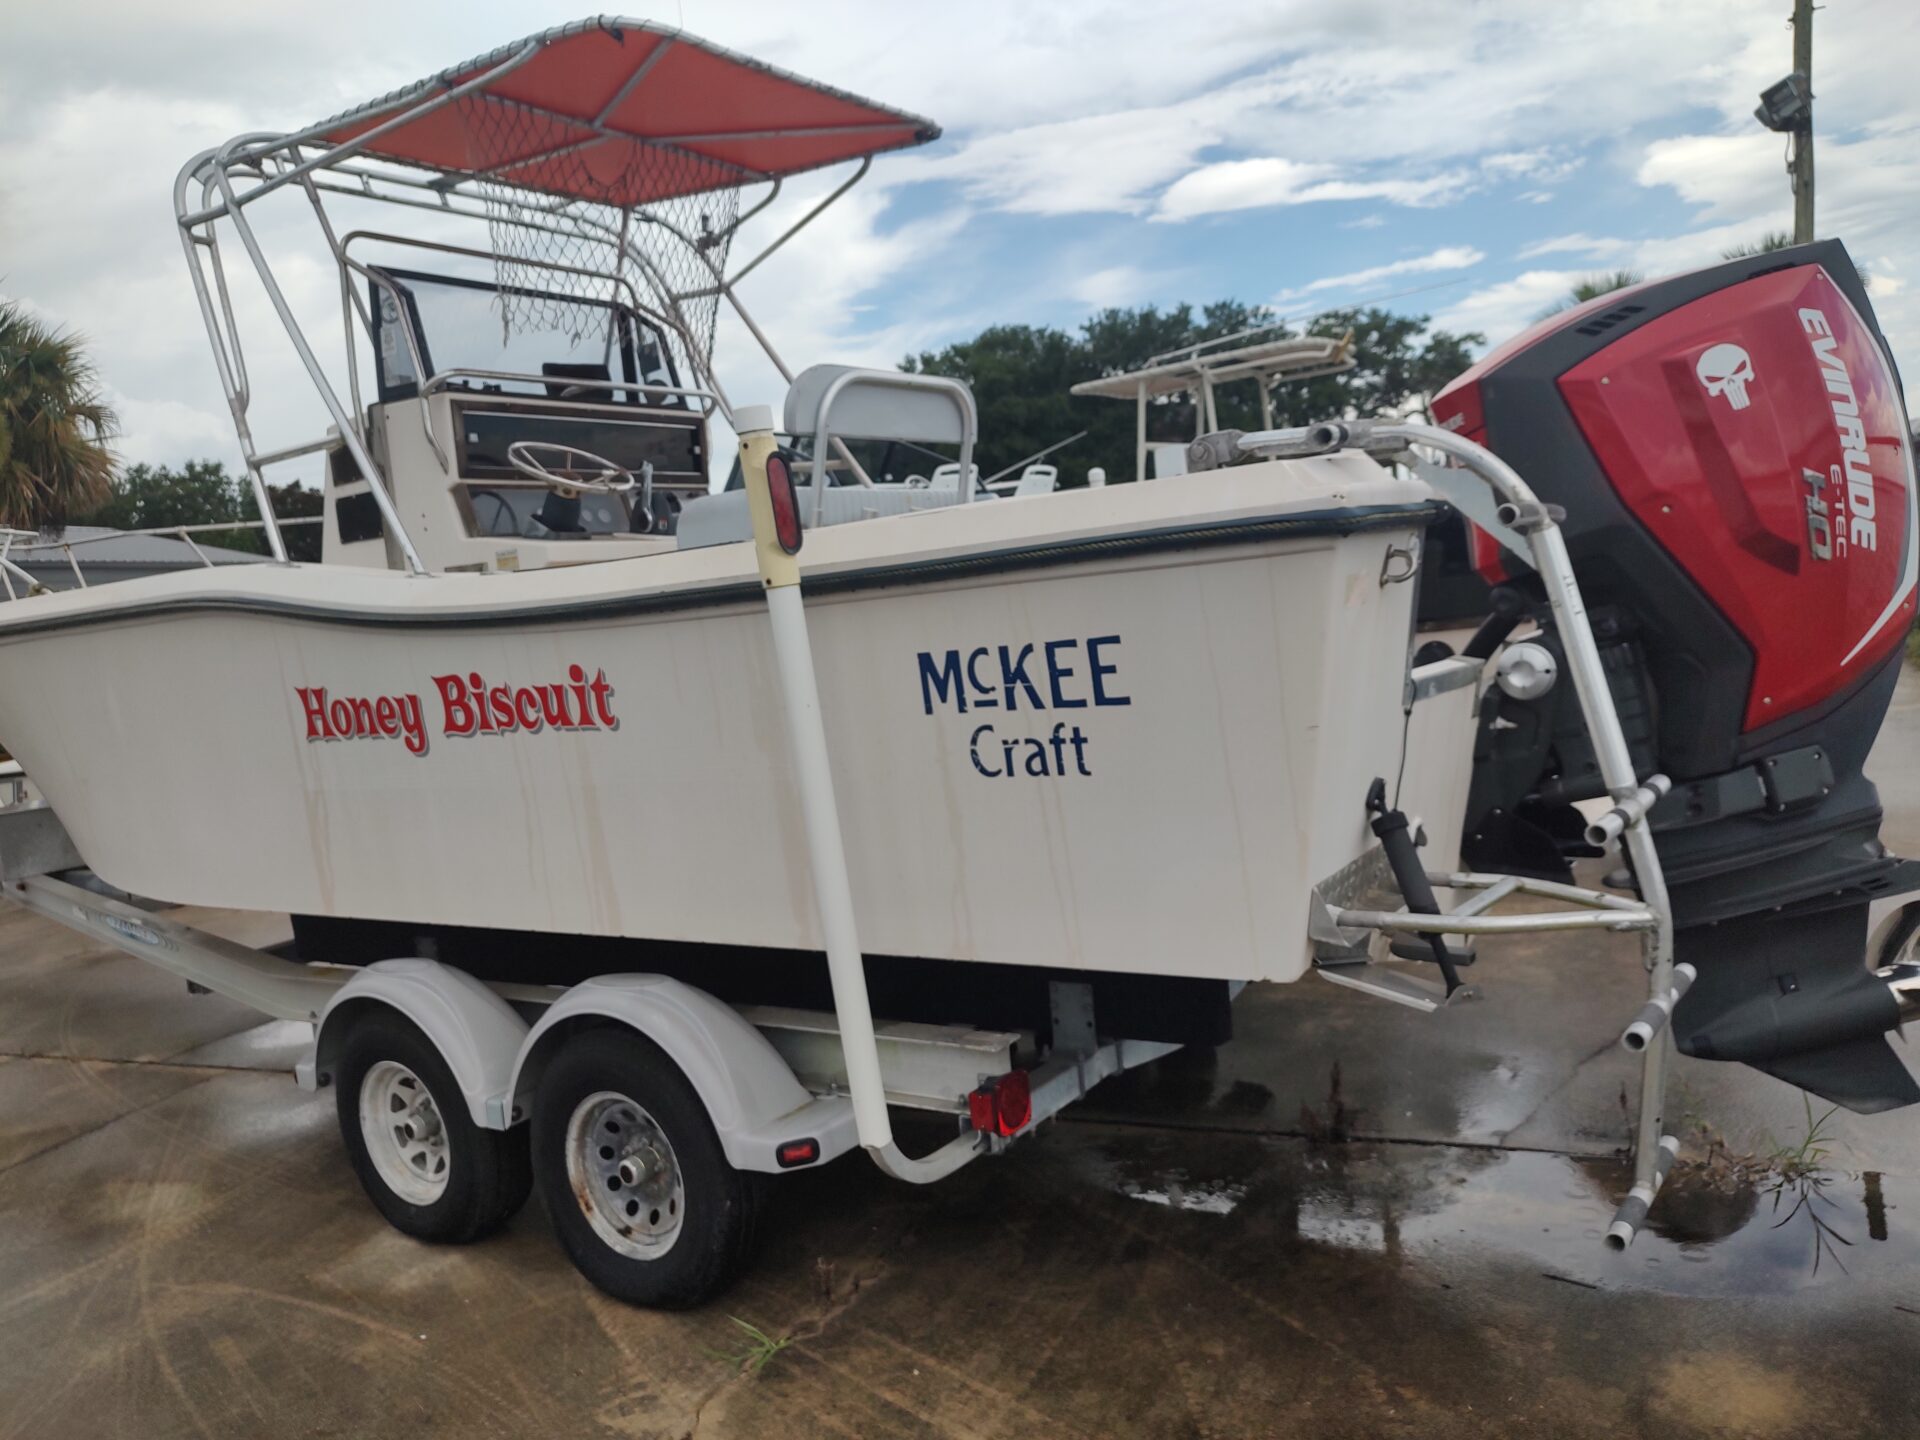 pre-owned mckee craft, honey biscuit, used fishing boats for sale